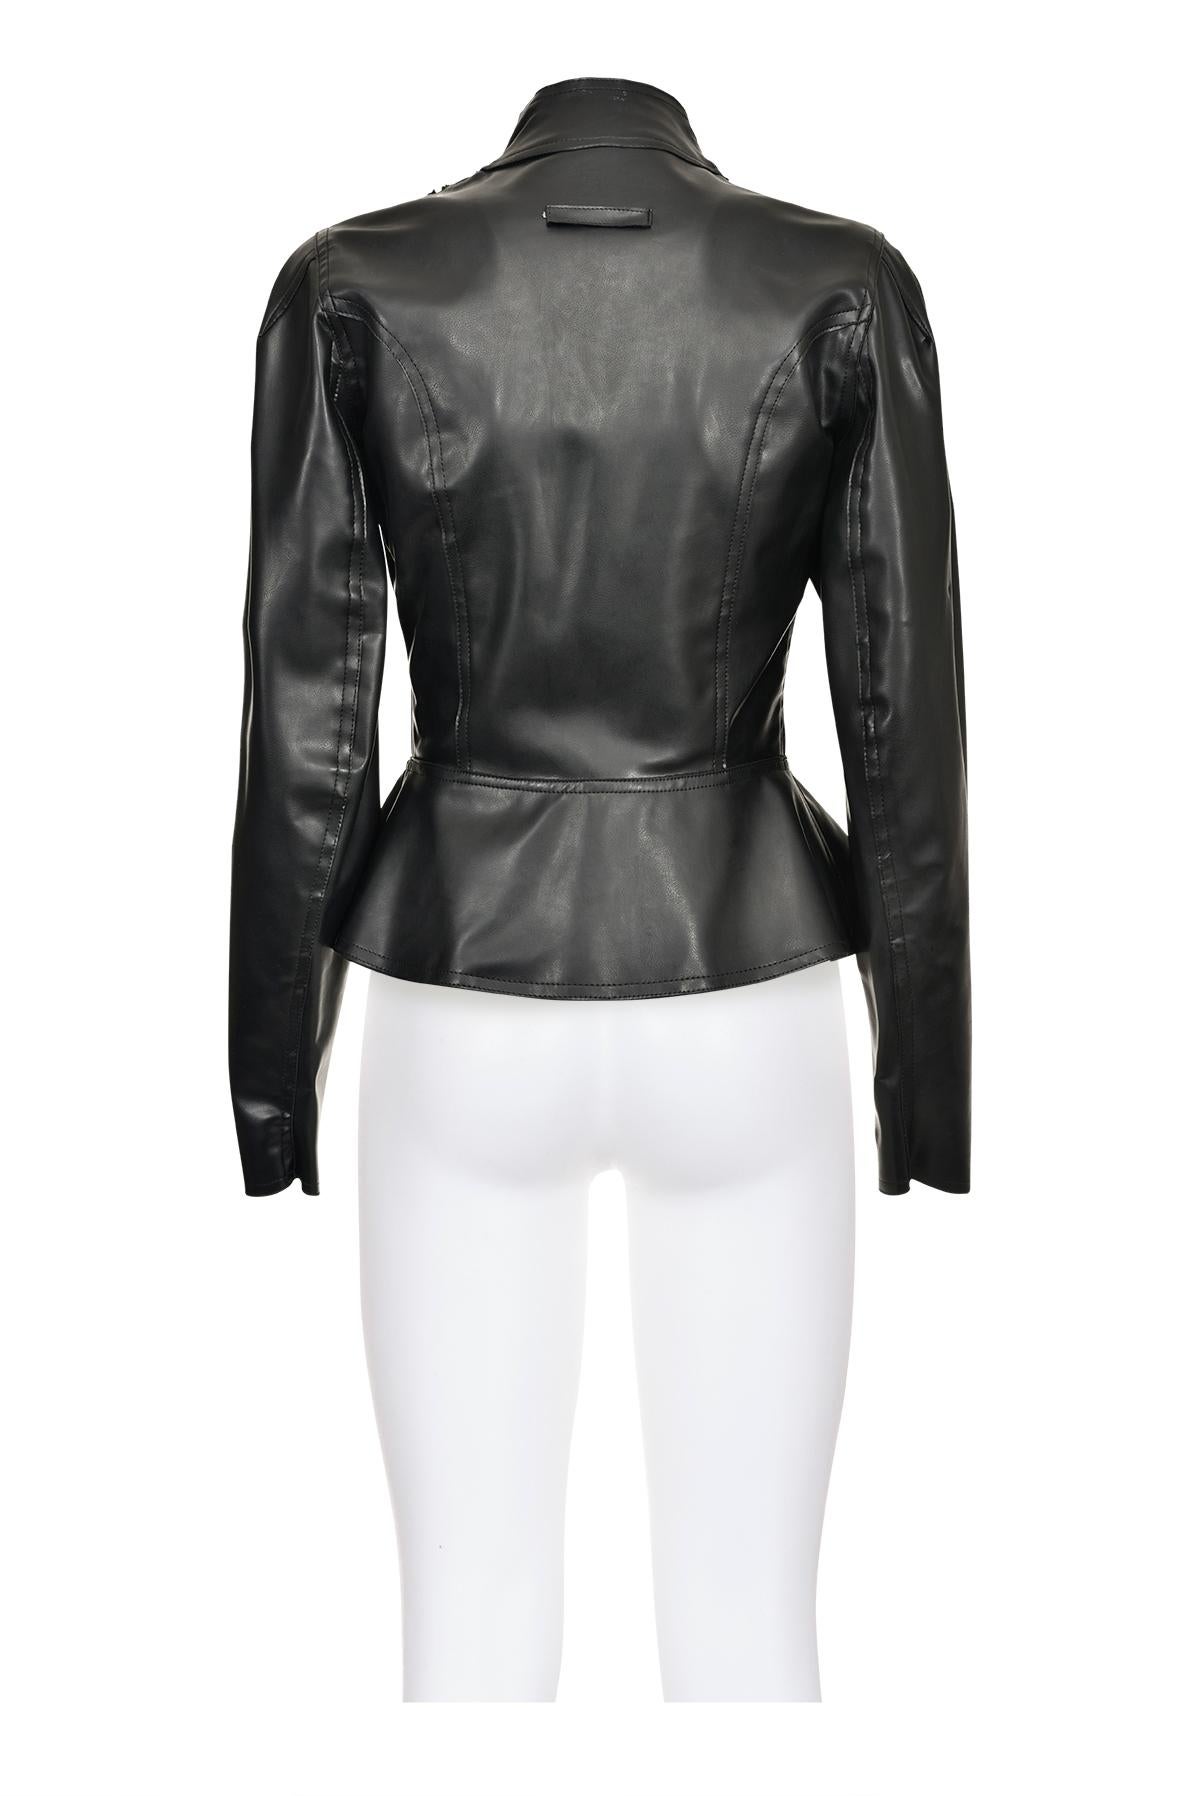 JEAN PAUL GAULTIER  FW 95 Fake Leather Bustier Jacket In Excellent Condition For Sale In Milano, MILANO